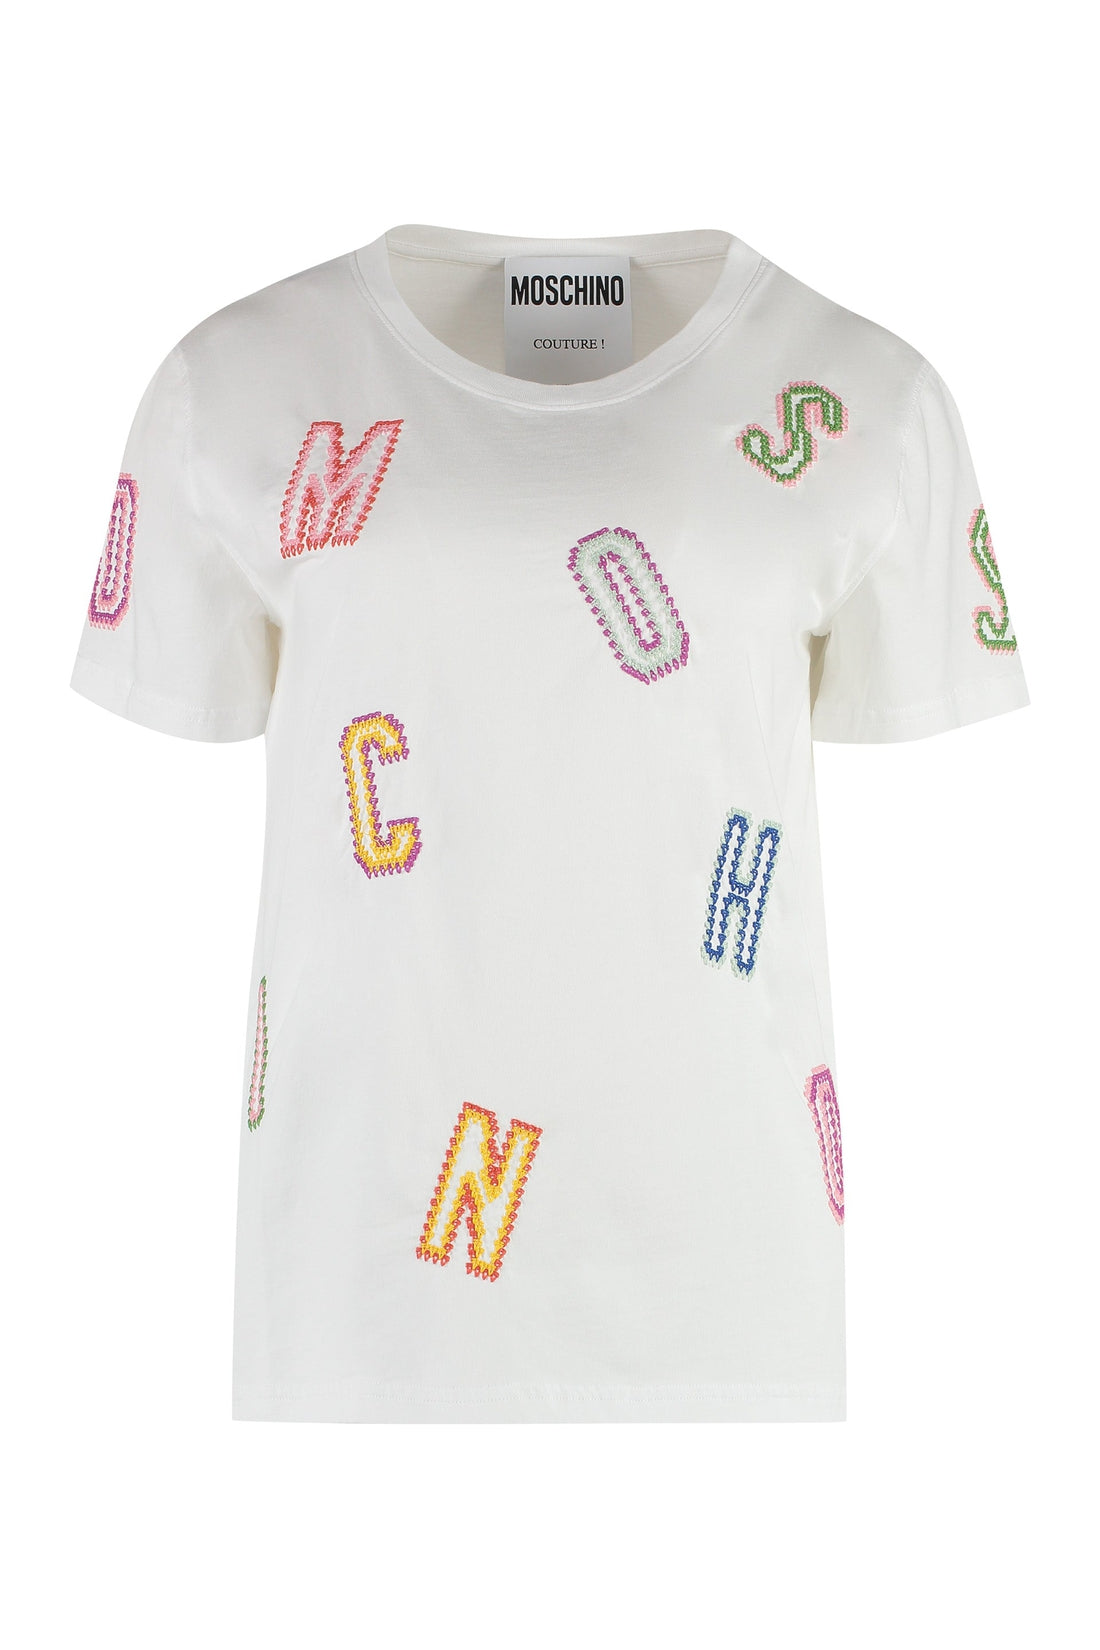 Moschino-OUTLET-SALE-Logo embroidery cotton t-shirt-ARCHIVIST